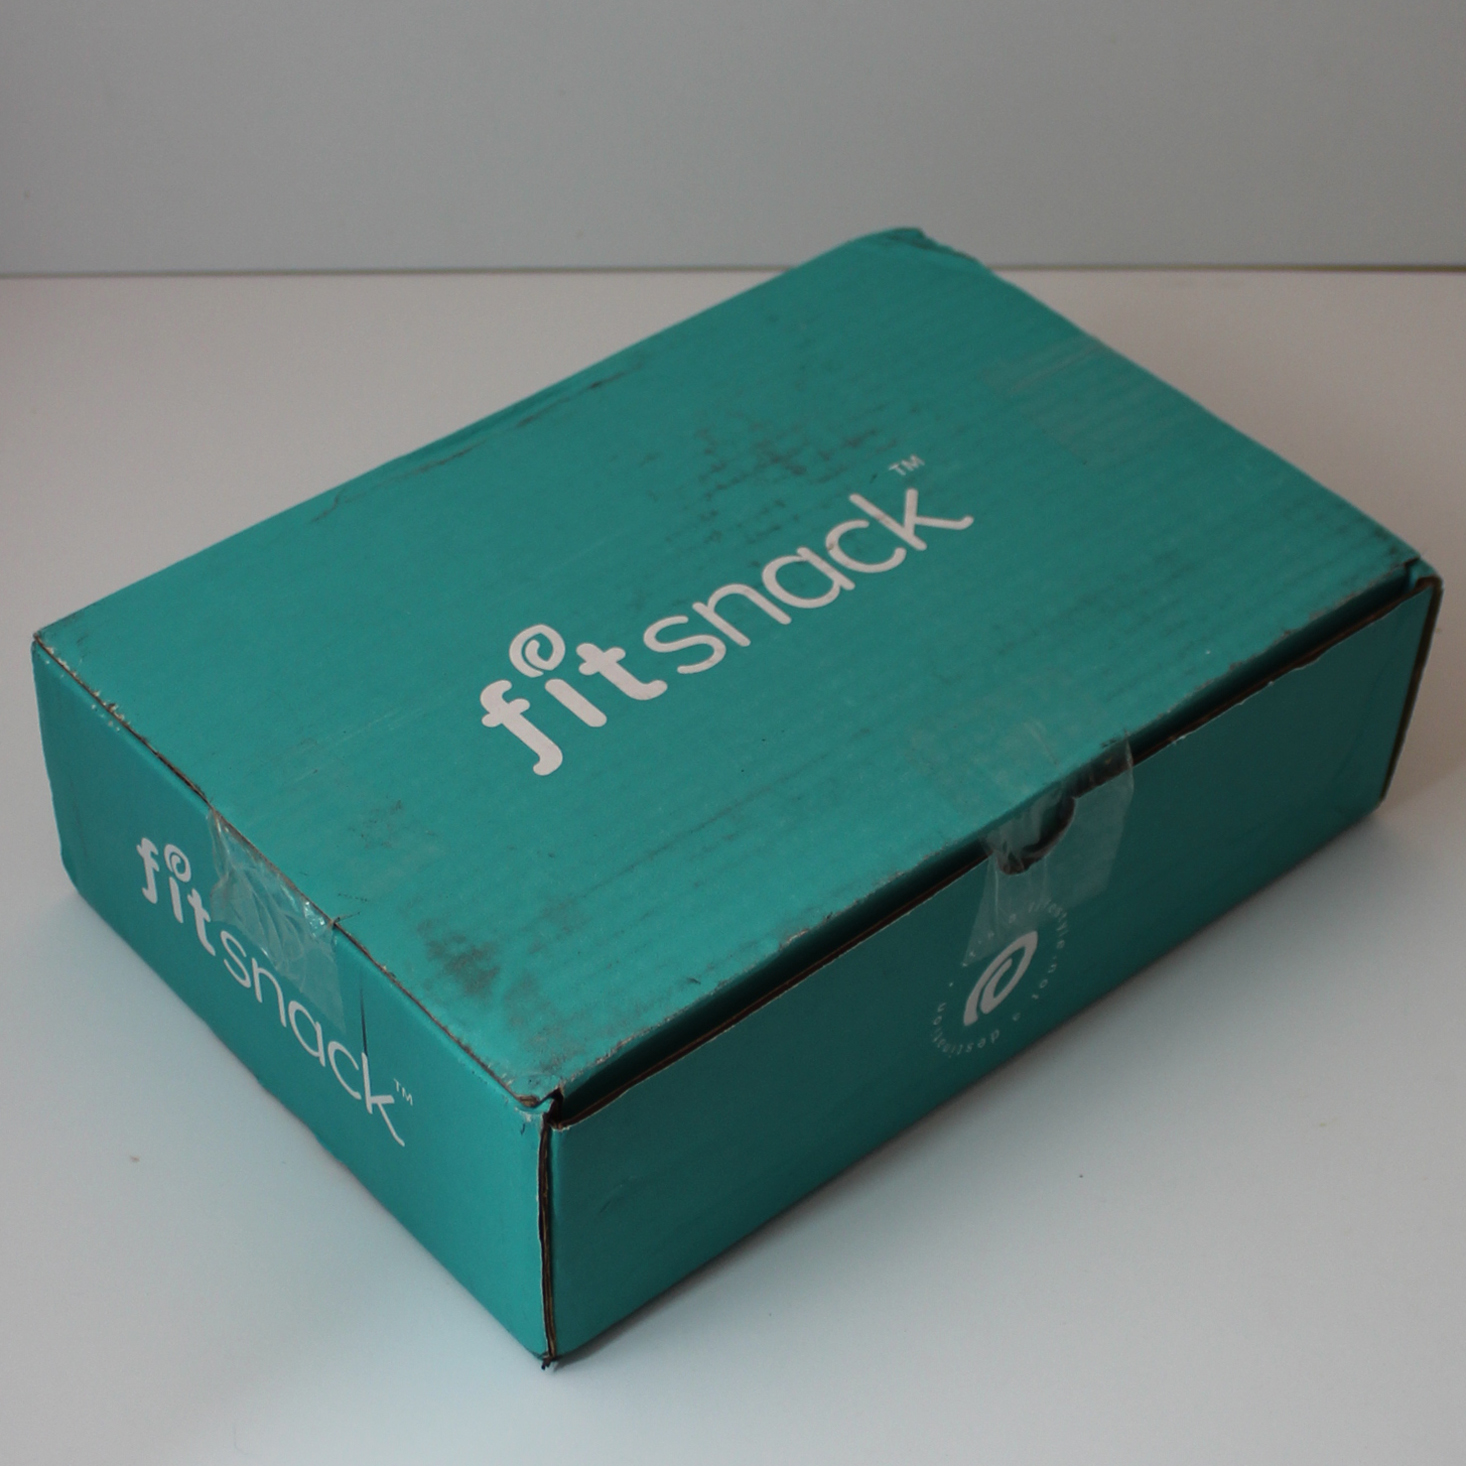 Fit Snack Subscription Box Review – February 2021